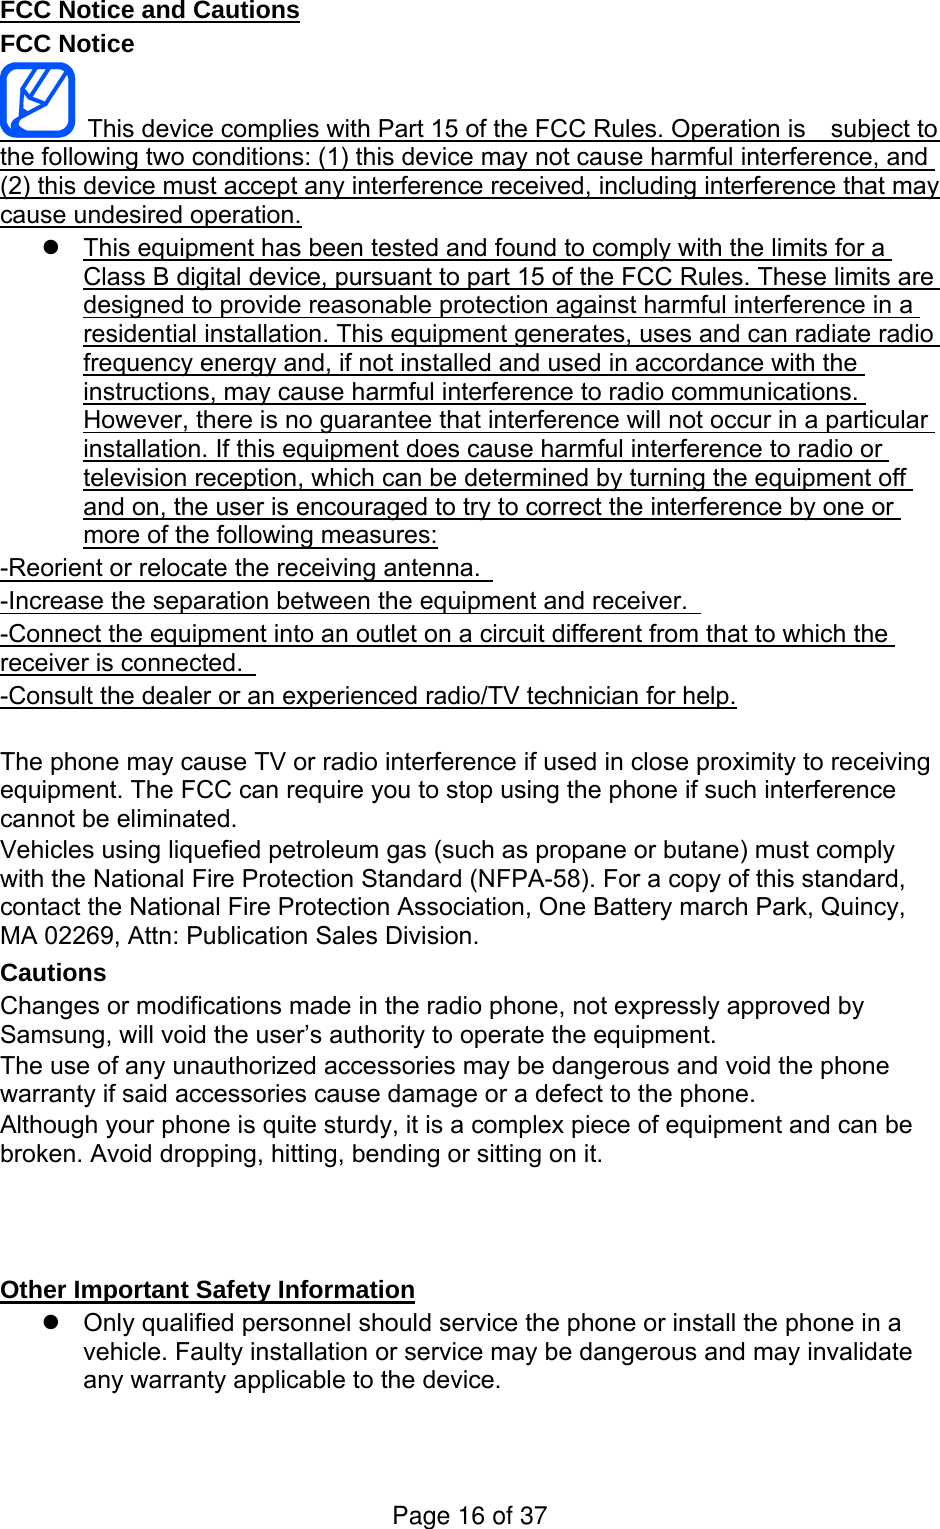 FCC Notice and Cautions FCC Notice   This device complies with Part 15 of the FCC Rules. Operation is    subject to the following two conditions: (1) this device may not cause harmful interference, and (2) this device must accept any interference received, including interference that may cause undesired operation.   This equipment has been tested and found to comply with the limits for a Class B digital device, pursuant to part 15 of the FCC Rules. These limits are designed to provide reasonable protection against harmful interference in a residential installation. This equipment generates, uses and can radiate radio frequency energy and, if not installed and used in accordance with the instructions, may cause harmful interference to radio communications. However, there is no guarantee that interference will not occur in a particular installation. If this equipment does cause harmful interference to radio or television reception, which can be determined by turning the equipment off and on, the user is encouraged to try to correct the interference by one or more of the following measures: -Reorient or relocate the receiving antenna.   -Increase the separation between the equipment and receiver.   -Connect the equipment into an outlet on a circuit different from that to which the receiver is connected.   -Consult the dealer or an experienced radio/TV technician for help.  The phone may cause TV or radio interference if used in close proximity to receiving equipment. The FCC can require you to stop using the phone if such interference cannot be eliminated. Vehicles using liquefied petroleum gas (such as propane or butane) must comply with the National Fire Protection Standard (NFPA-58). For a copy of this standard, contact the National Fire Protection Association, One Battery march Park, Quincy, MA 02269, Attn: Publication Sales Division. Cautions Changes or modifications made in the radio phone, not expressly approved by Samsung, will void the user’s authority to operate the equipment. The use of any unauthorized accessories may be dangerous and void the phone warranty if said accessories cause damage or a defect to the phone. Although your phone is quite sturdy, it is a complex piece of equipment and can be broken. Avoid dropping, hitting, bending or sitting on it.    Other Important Safety Information   Only qualified personnel should service the phone or install the phone in a vehicle. Faulty installation or service may be dangerous and may invalidate any warranty applicable to the device. Page 16 of 37